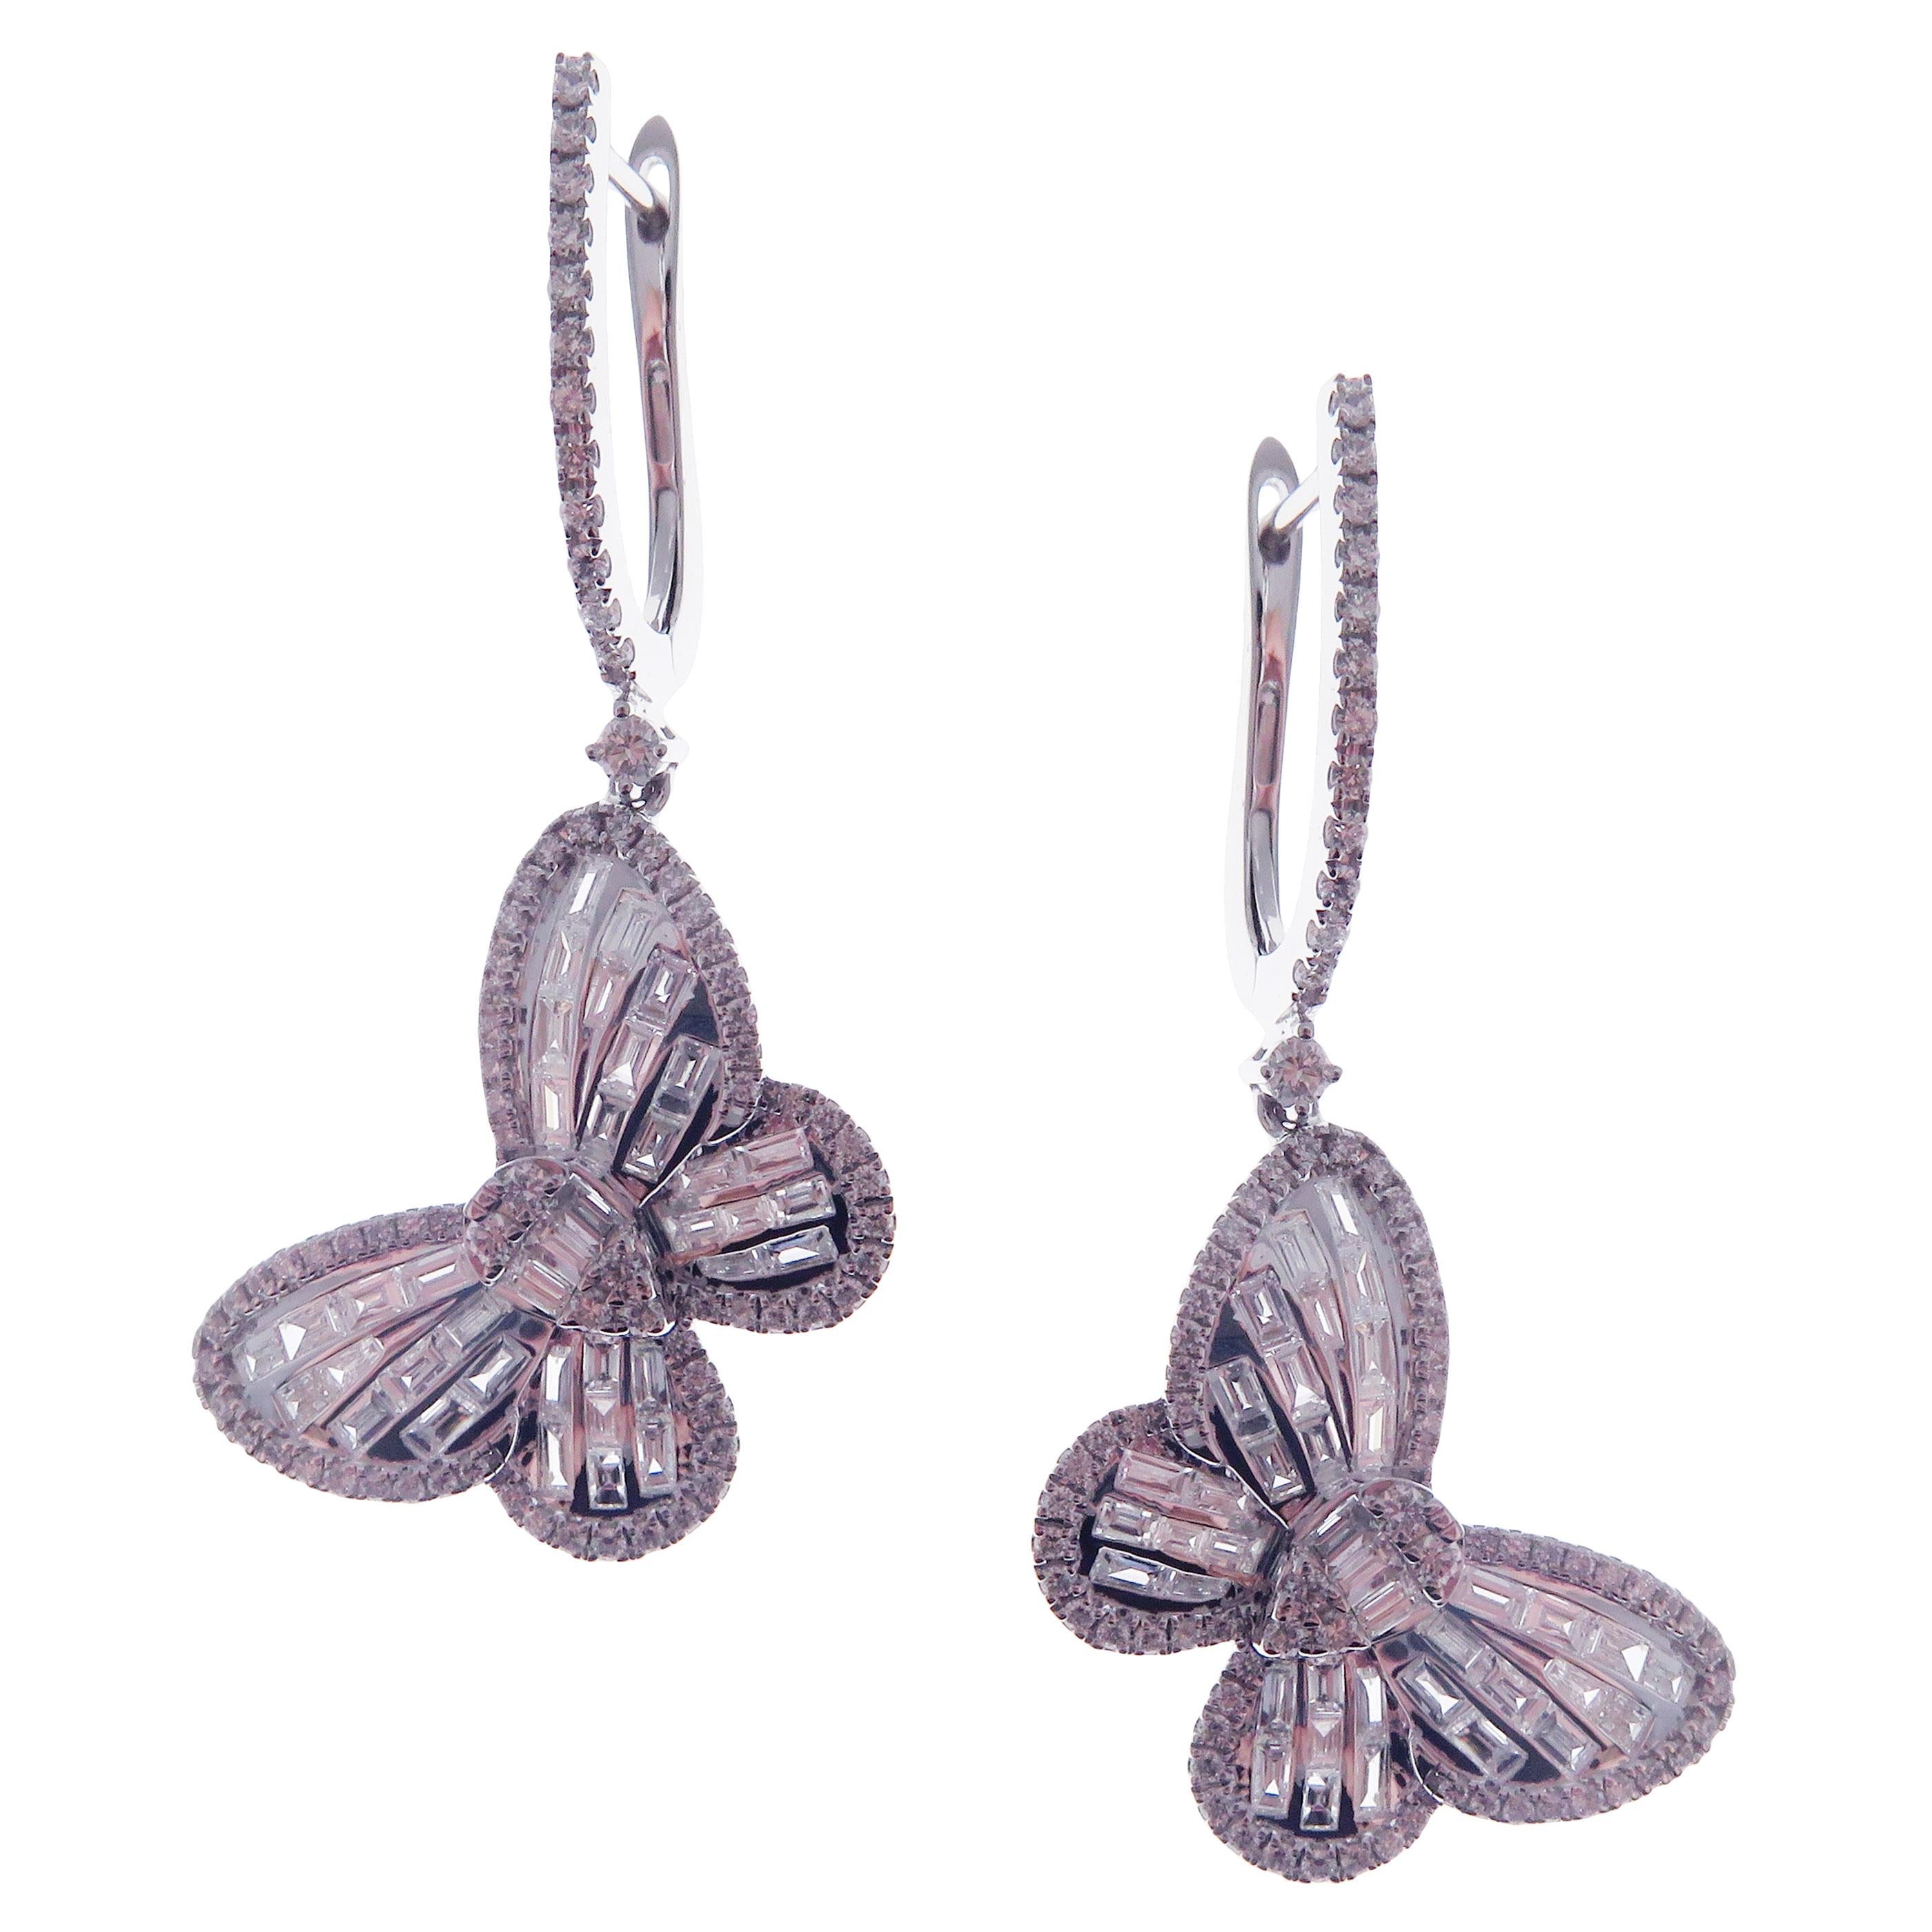 These classic butterfly dangling earrings with white round diamonds and baguette diamonds are crafted in 18-karat white gold, featuring 156 round white diamonds totaling of 0.75 carats and 78 baguette white diamonds totaling of 1.42 carats.
These